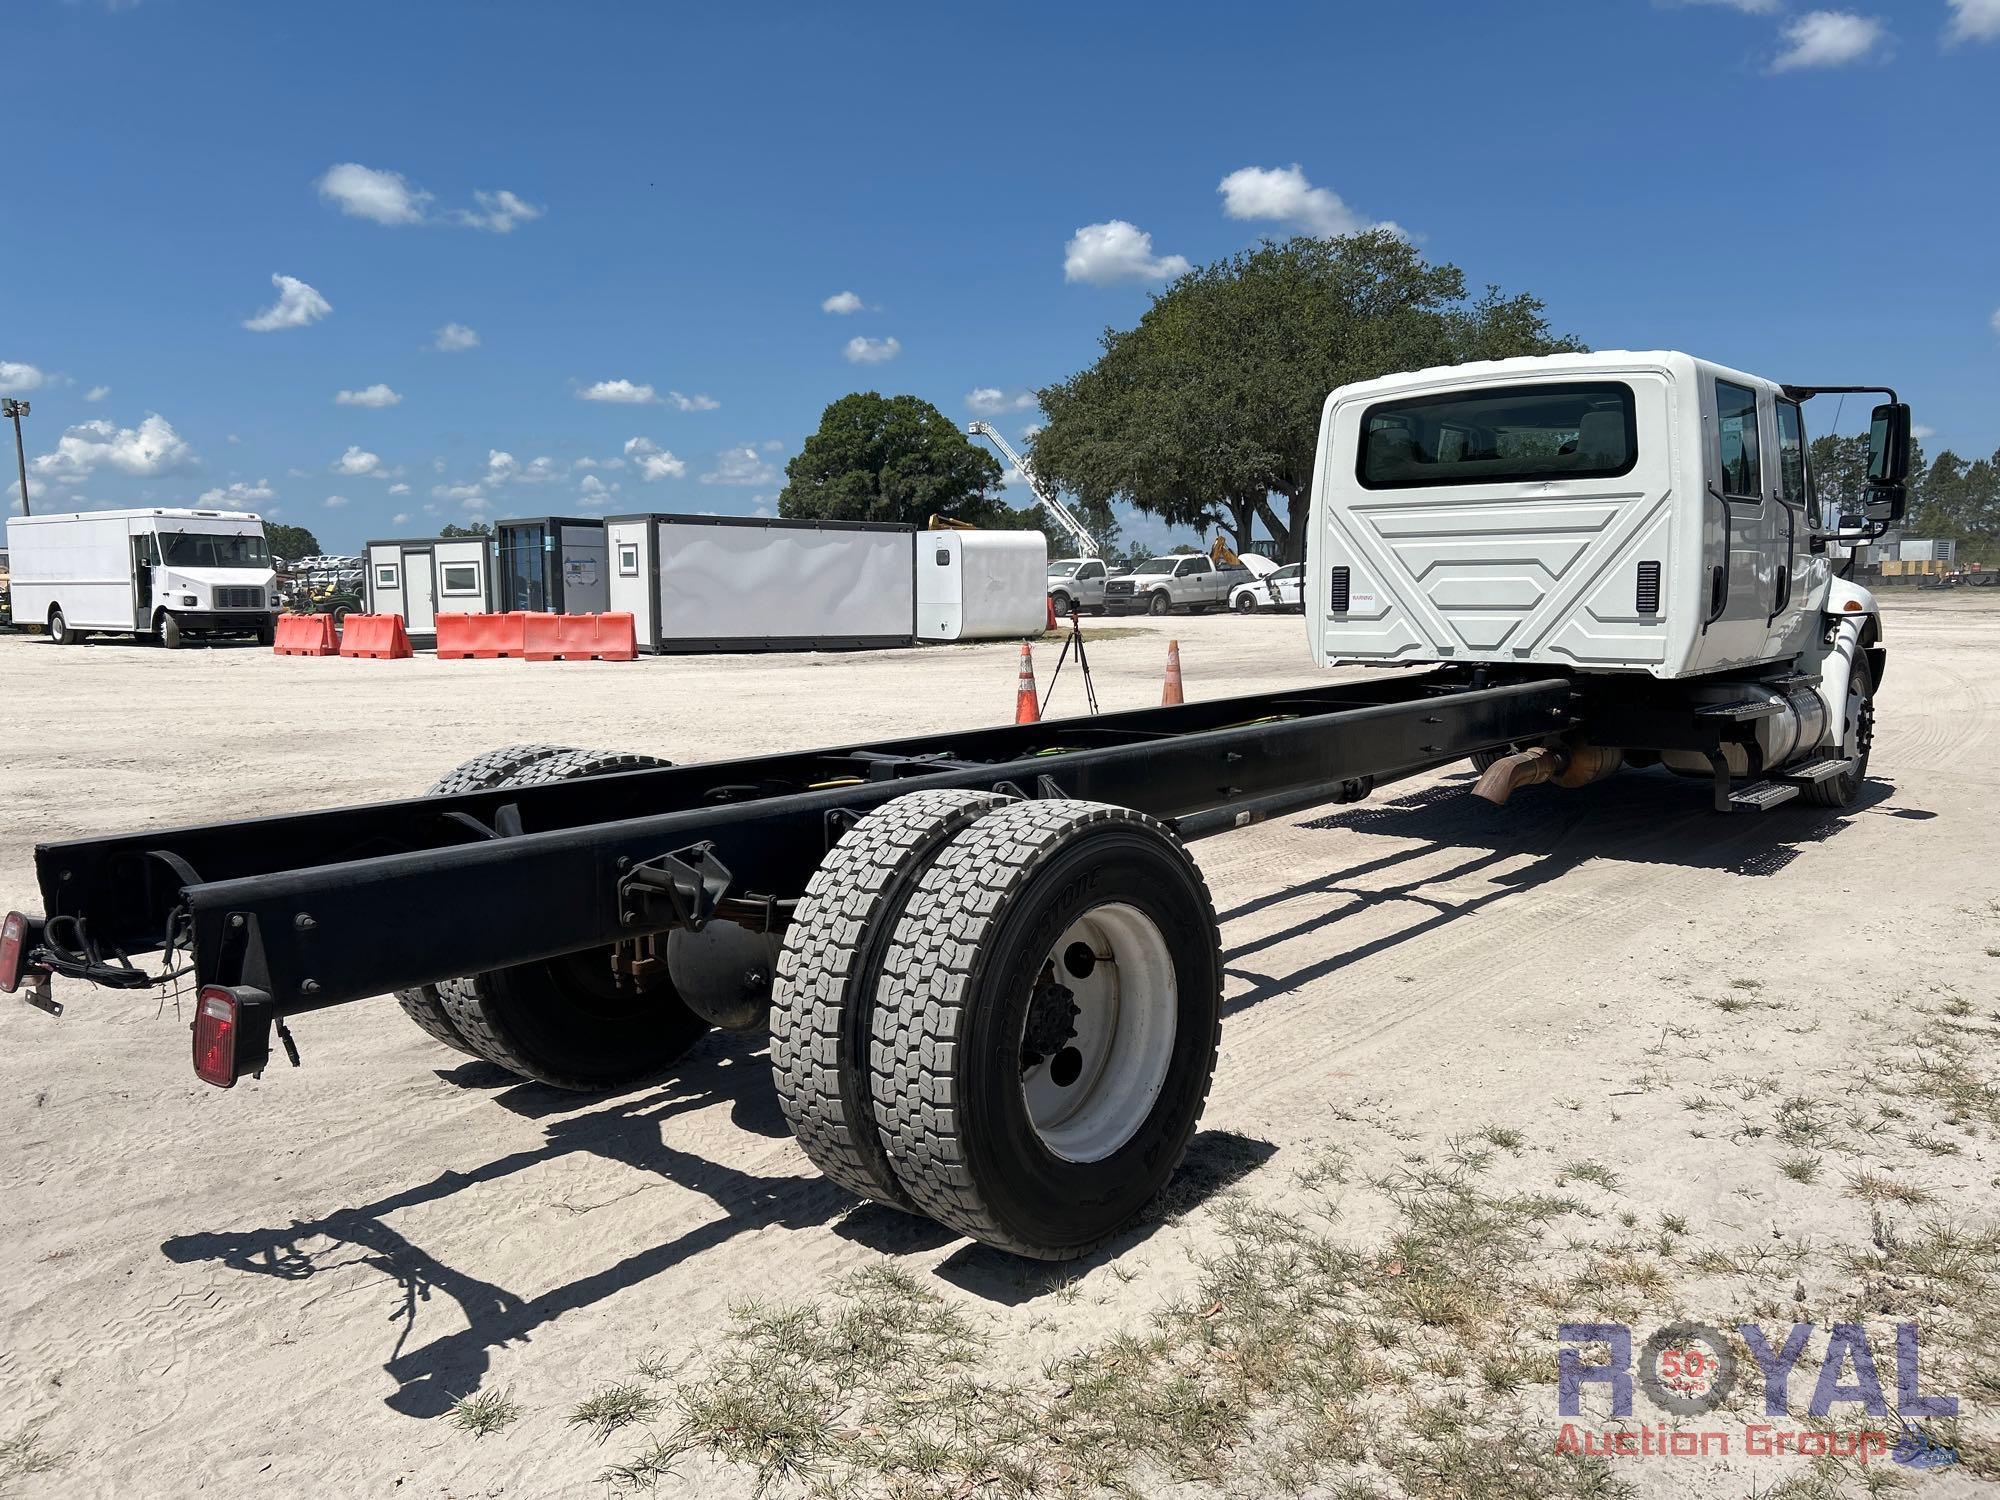 2013 International DuraStar 4300 Crew Cab Cab and Chassis